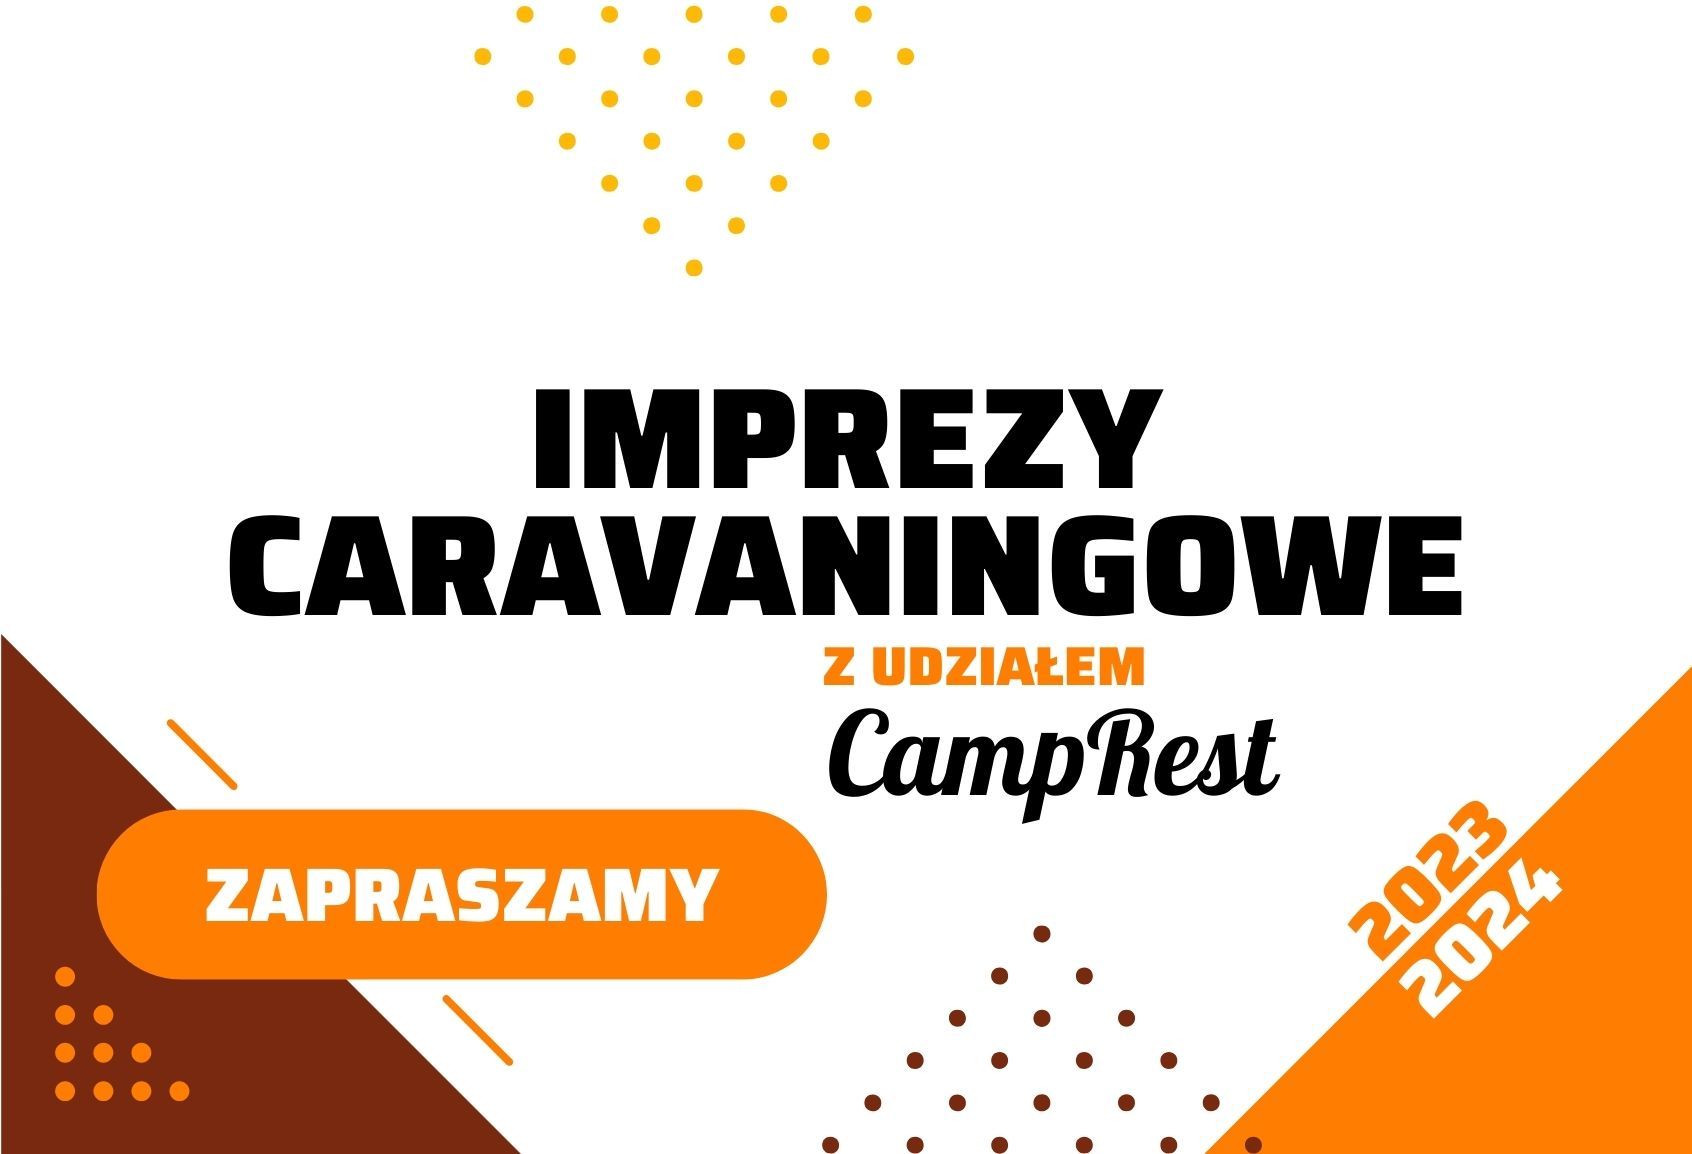 Caravanning events with CampRest – main image